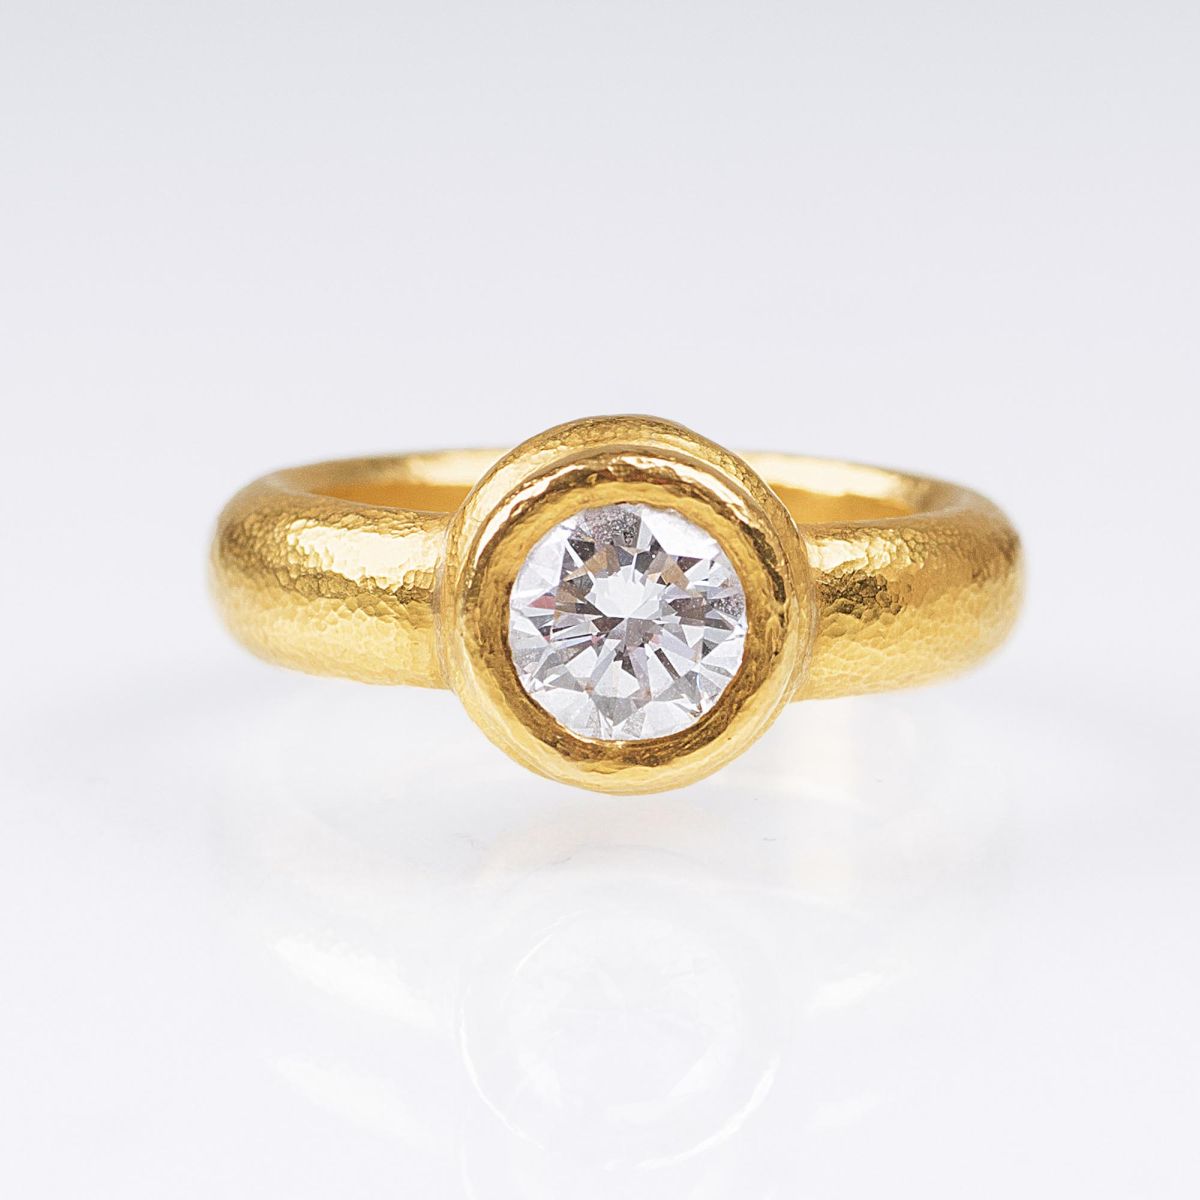 A highquality Solitaire Ring by Armin Haase